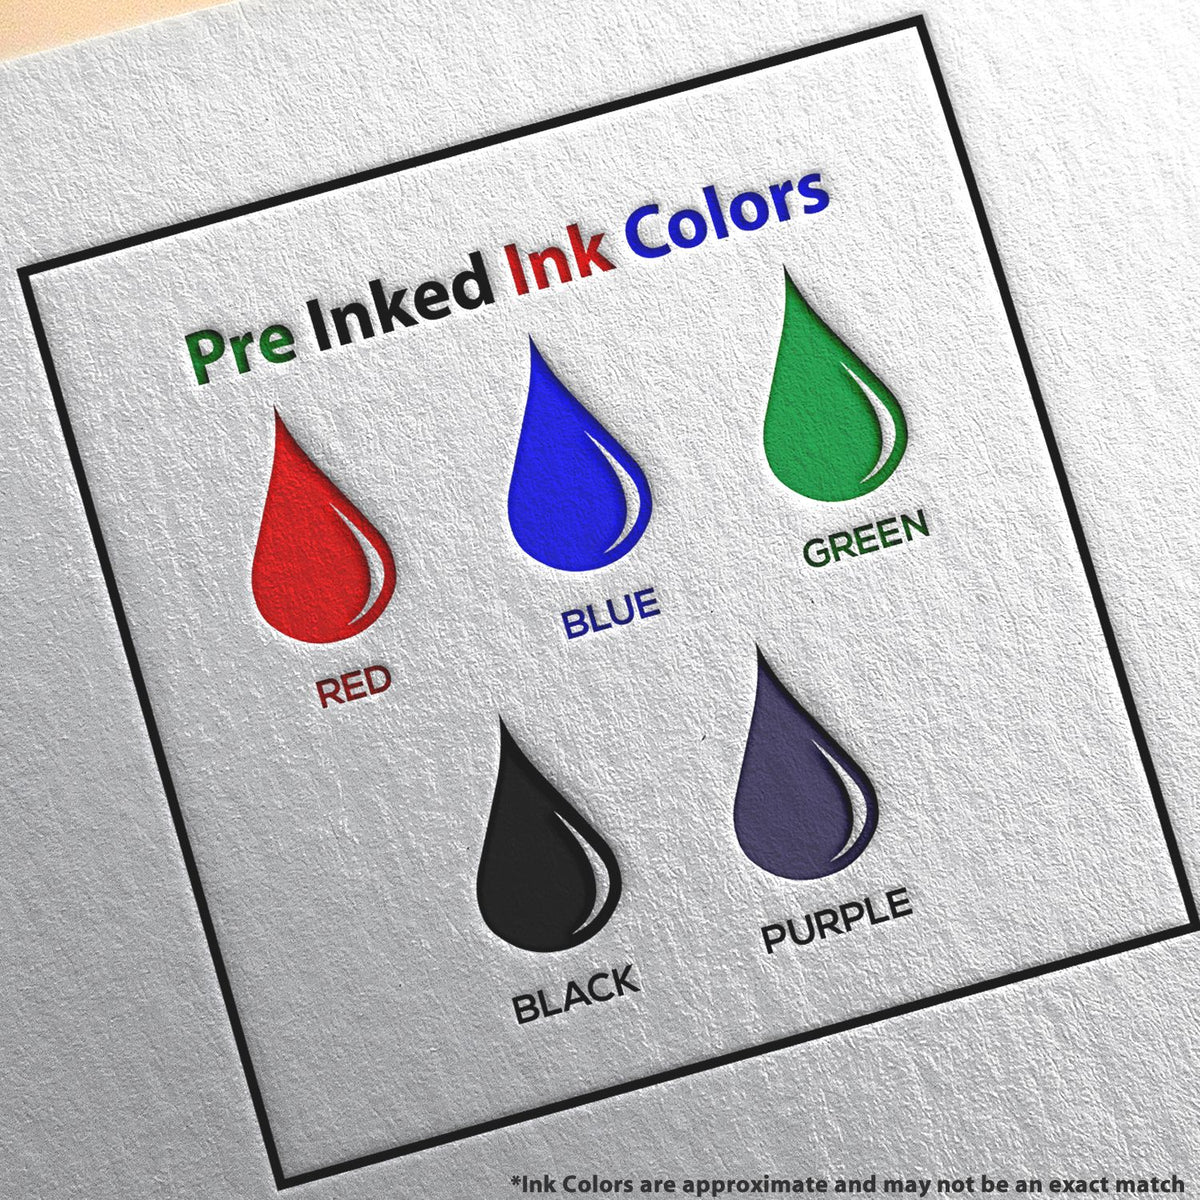 A picture showing the different ink colors or hues available for the MaxLight Premium Pre-Inked Kentucky State Seal Notarial Stamp product.